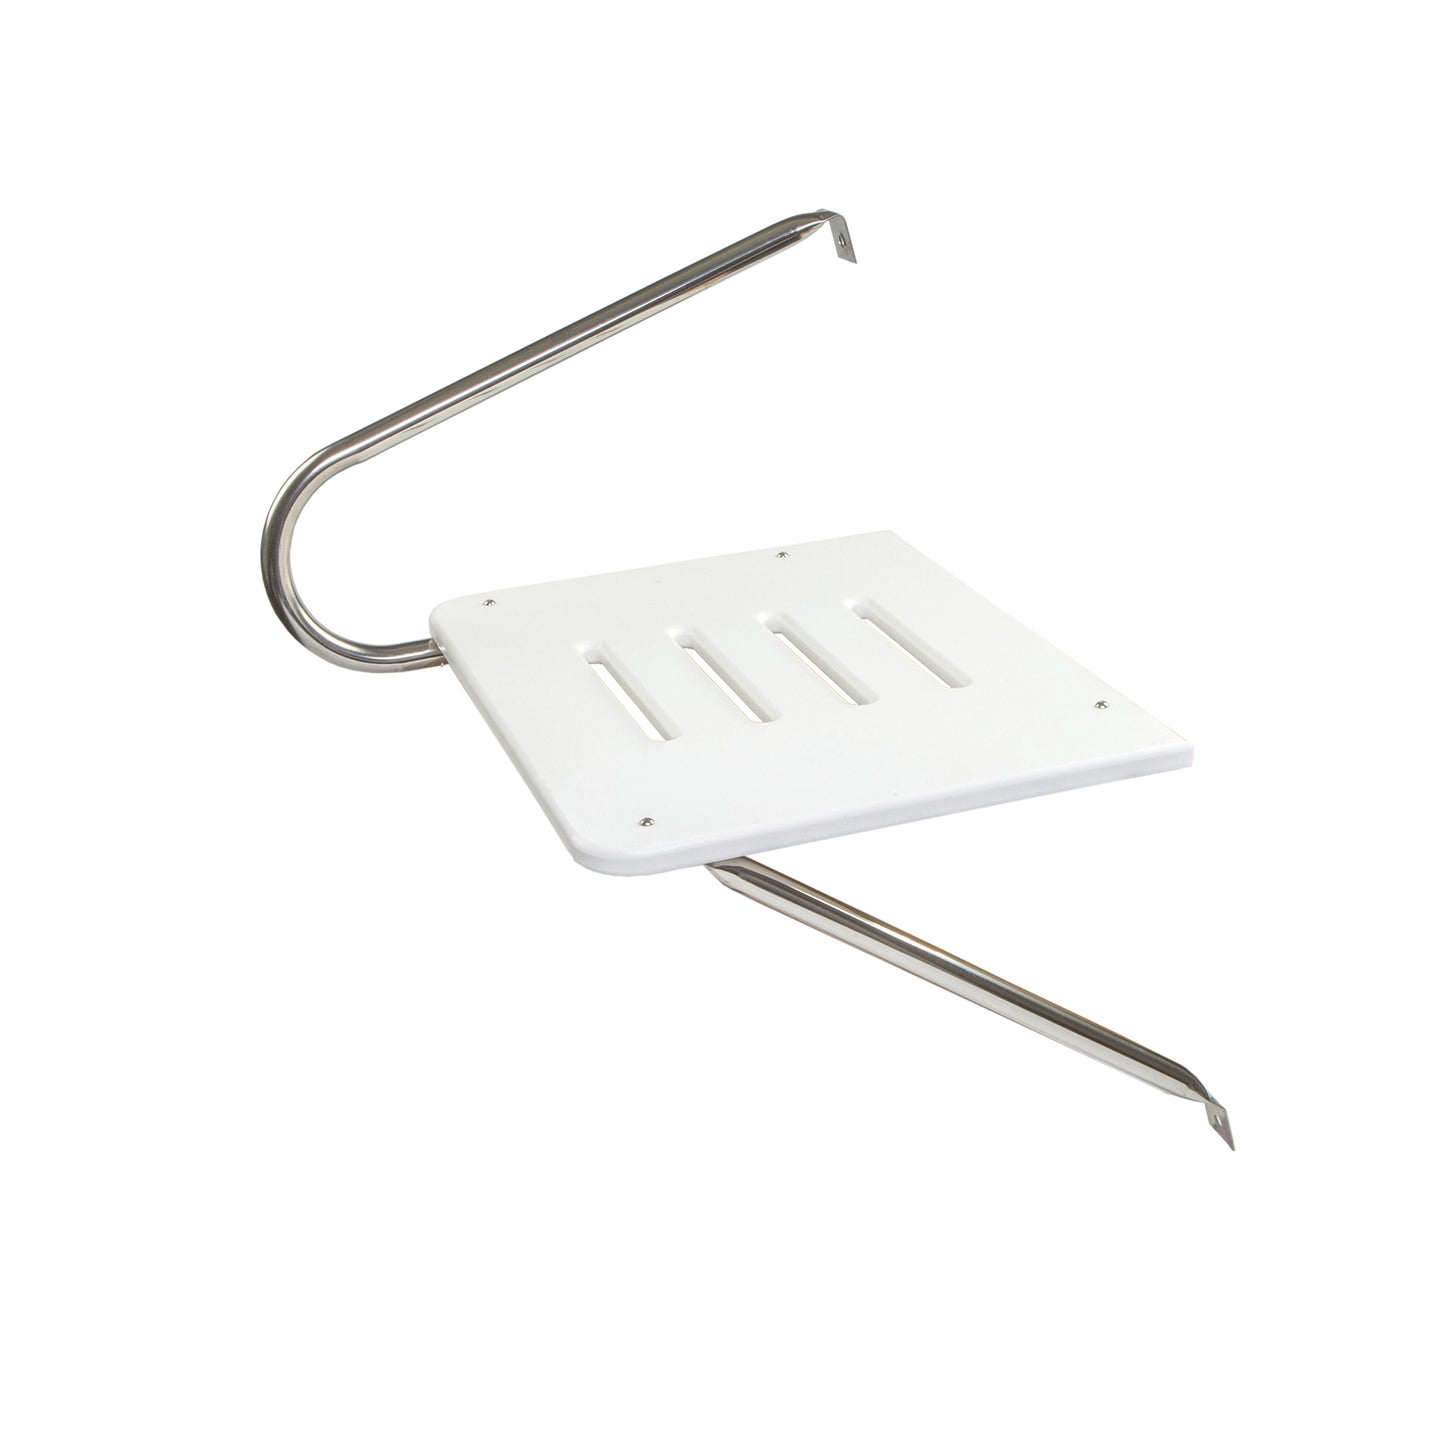 White Poly Swim Platform with Mounting Hardware for Boats with outboard Motors